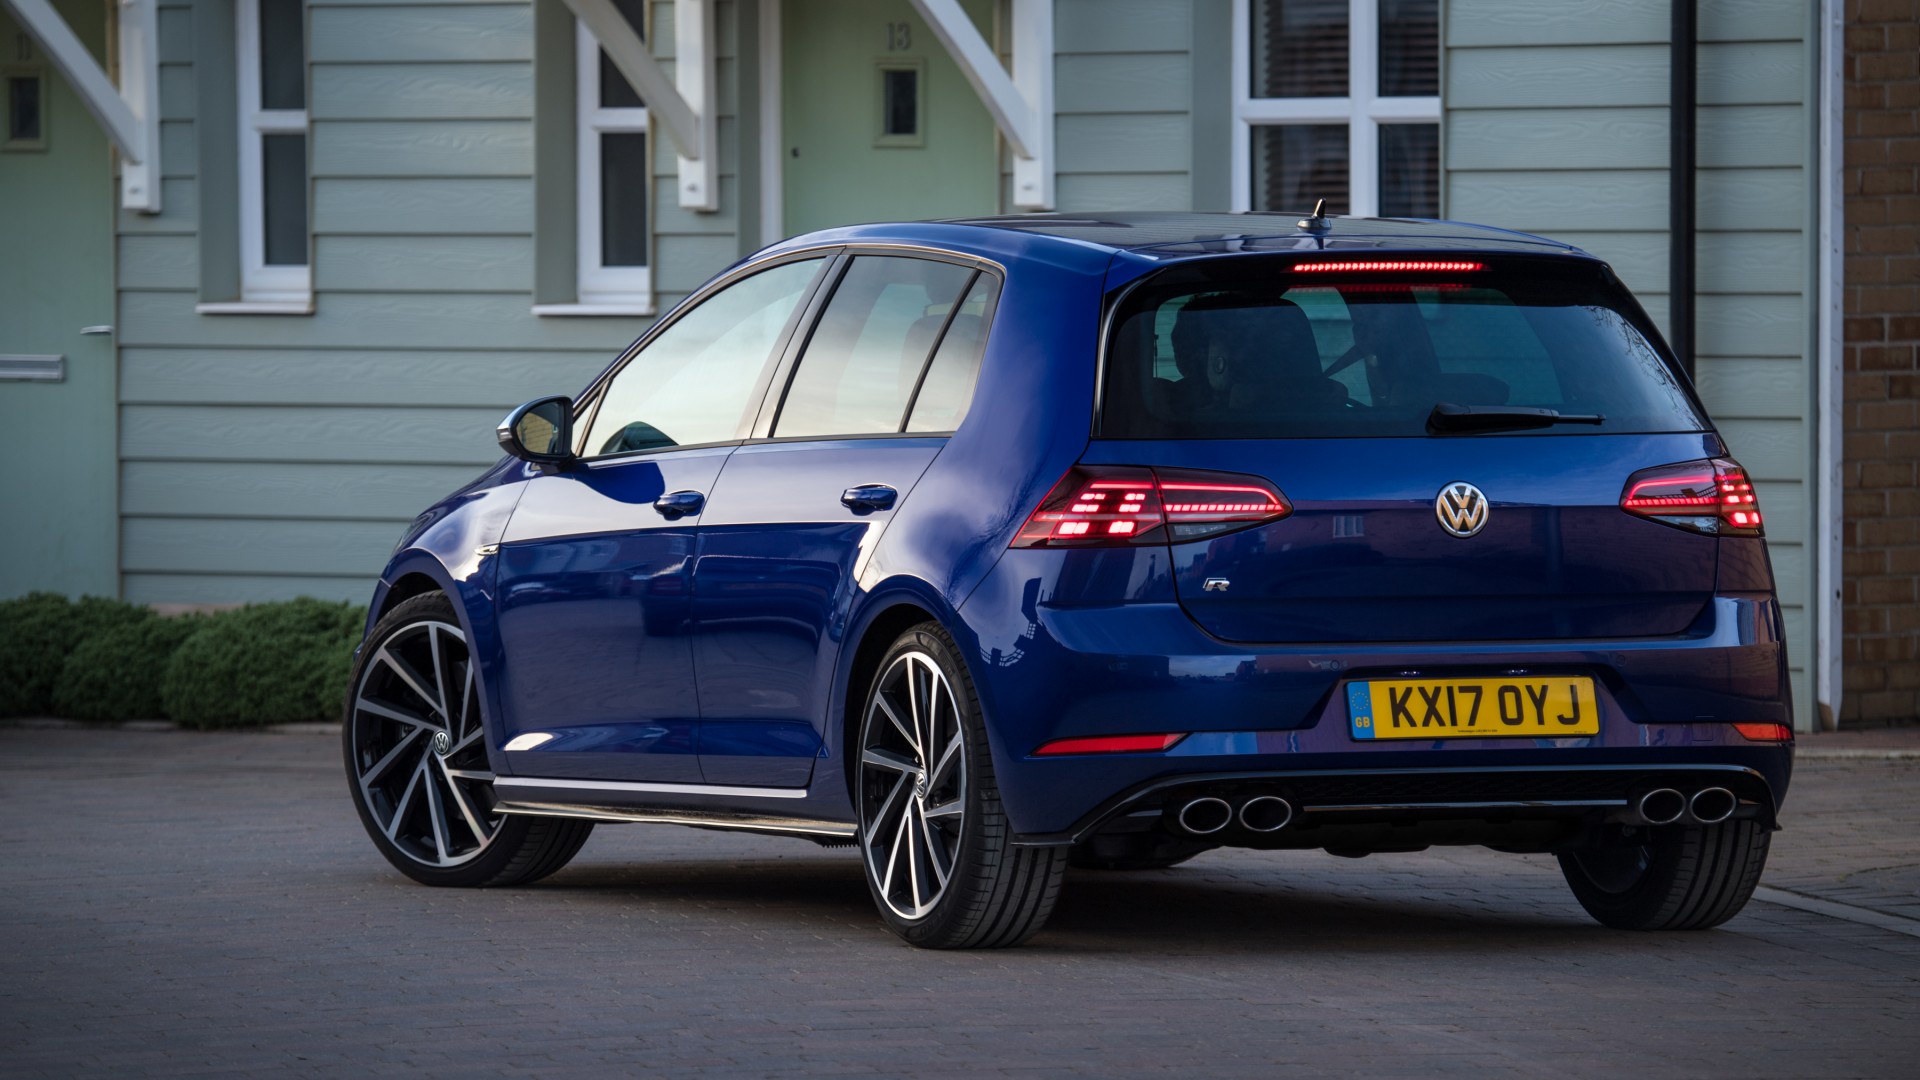 The Volkswagen Golf R may be the ultimate Golf | Square Mile